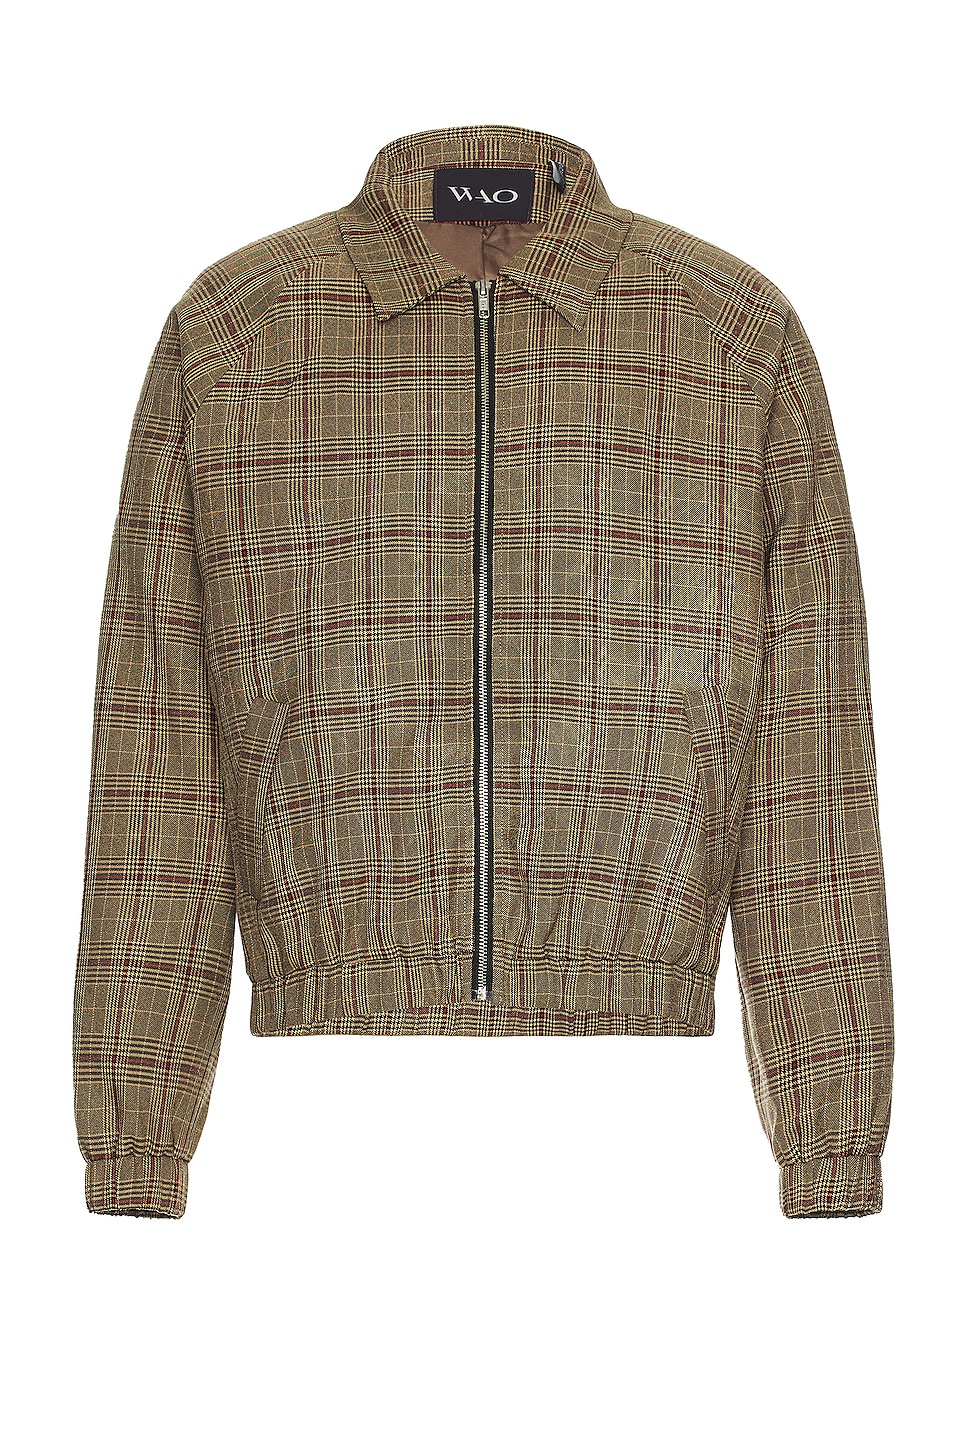 Image 1 of WAO Plaid Bomber Jacket in brown & black